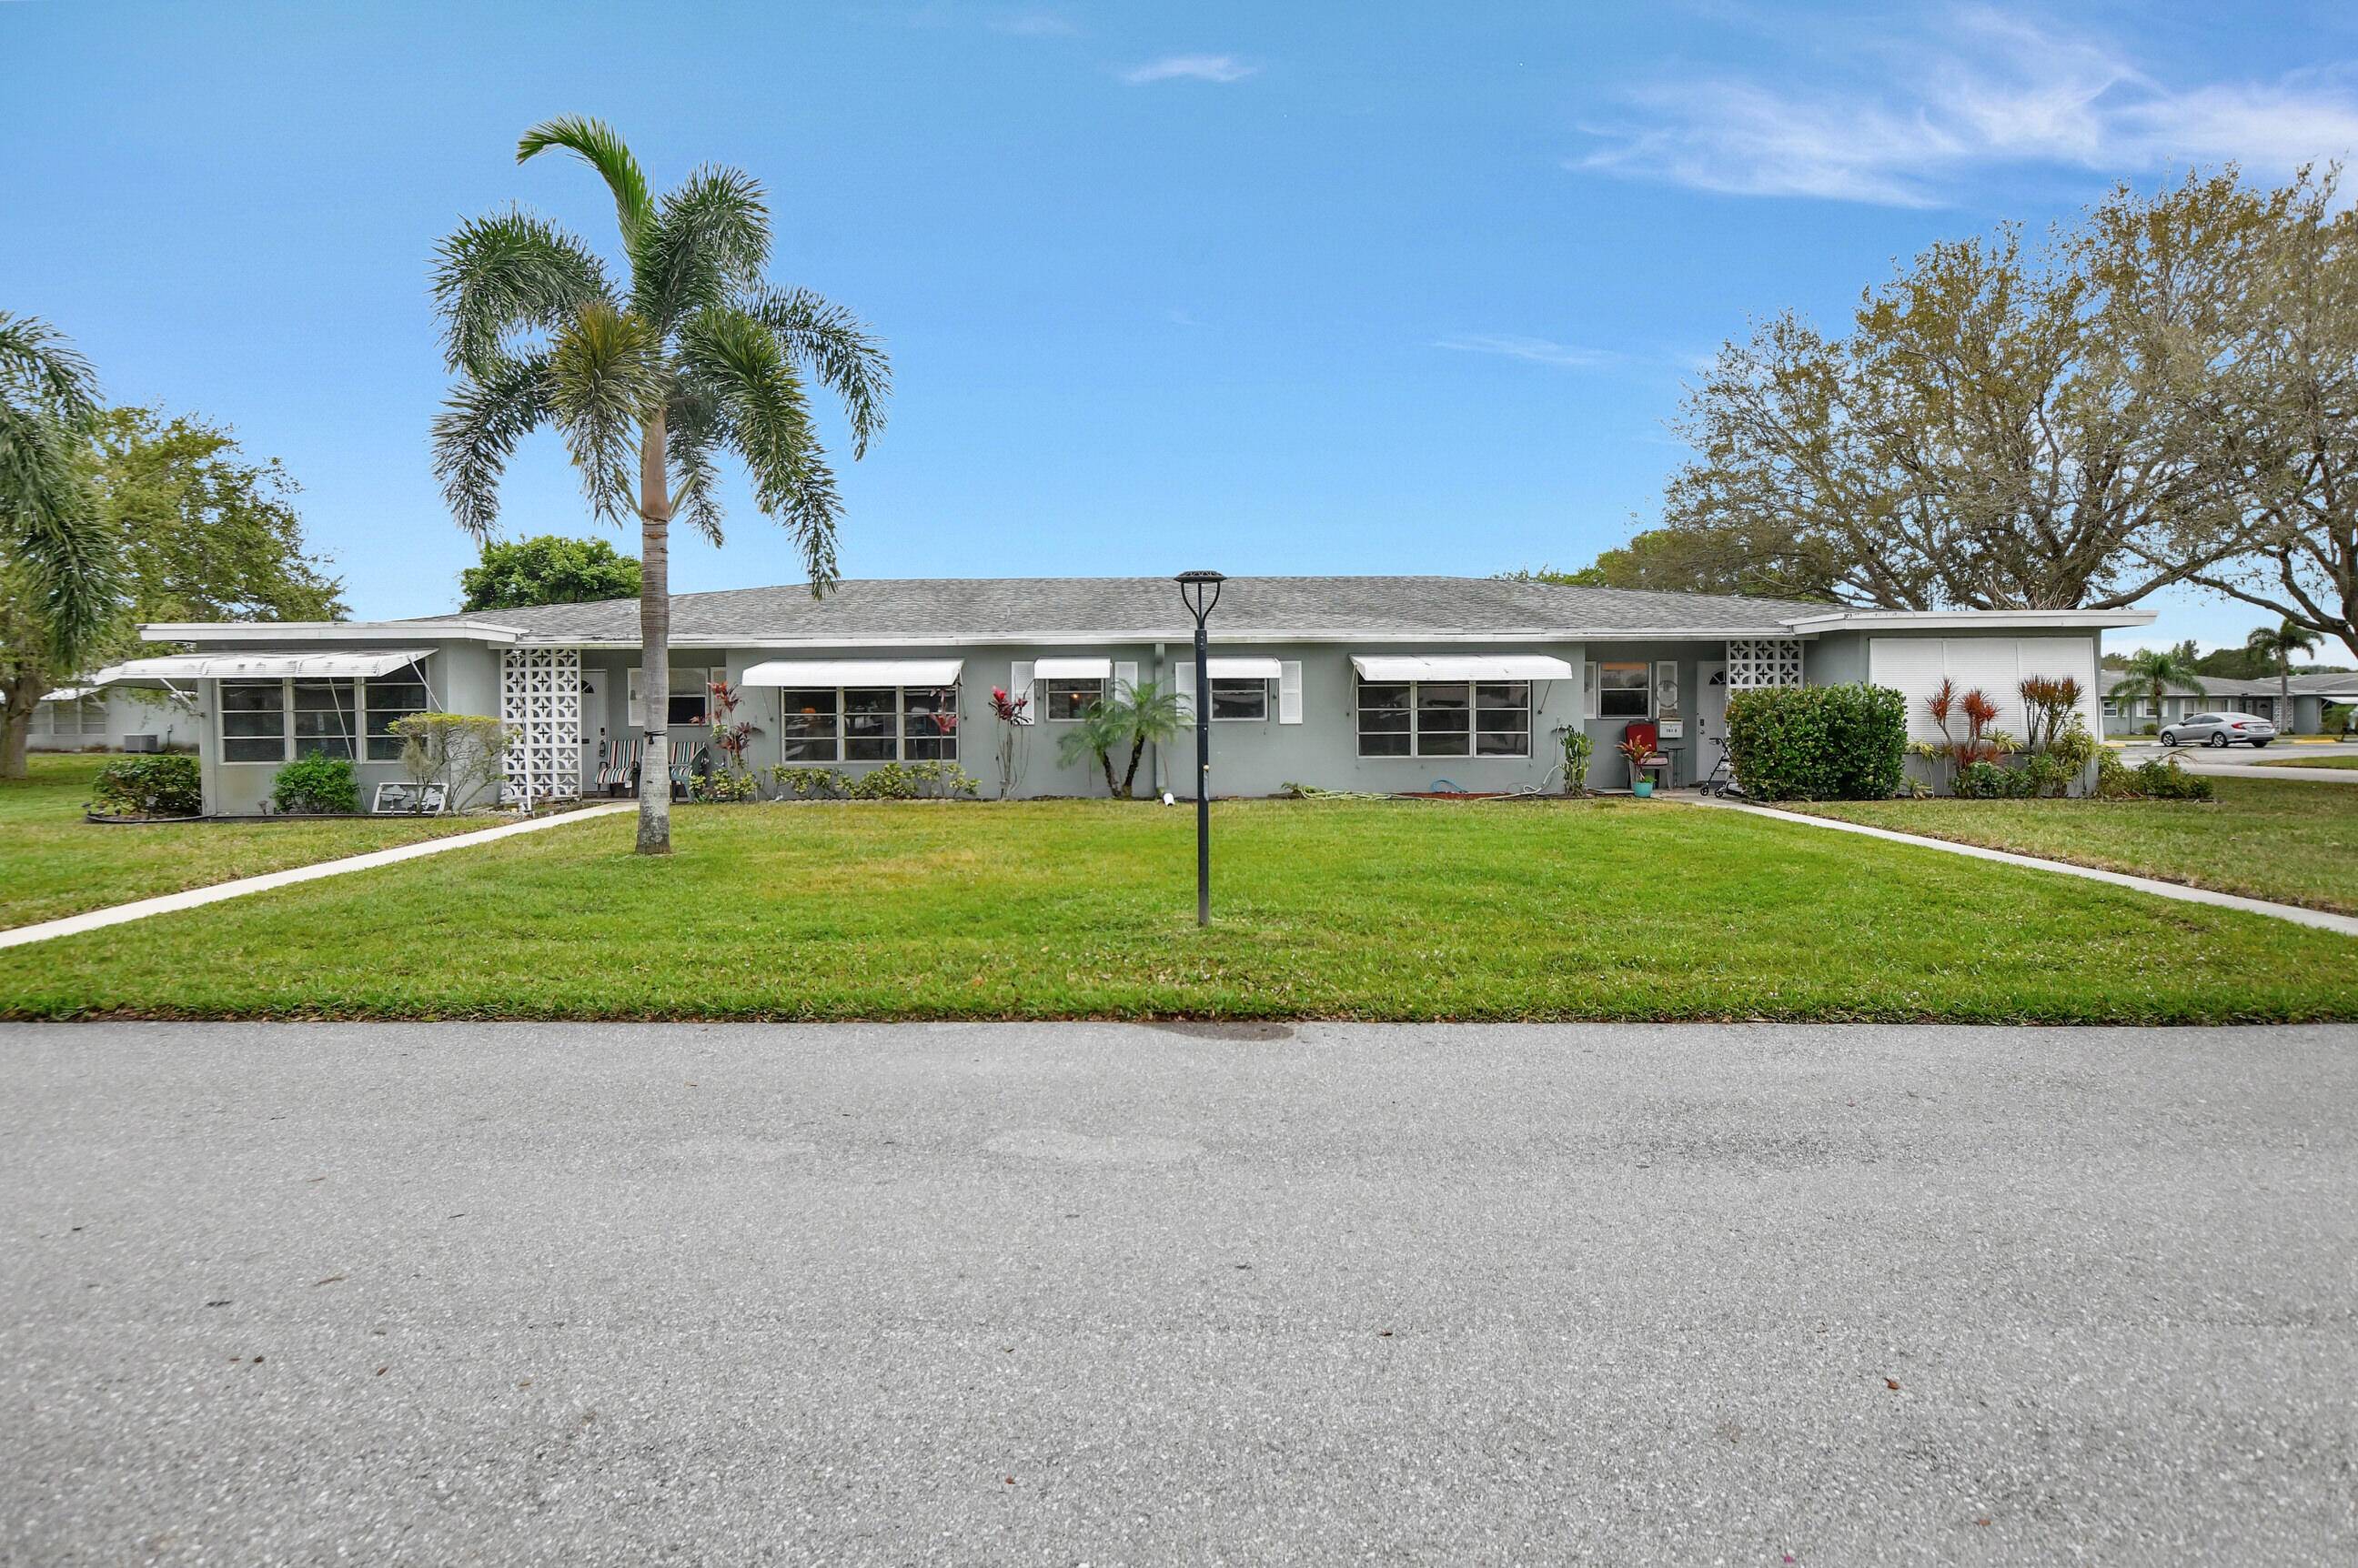 This 2BR 2BA corner villa is located in the charming 55 community of High Point, located in central Delray Beach.